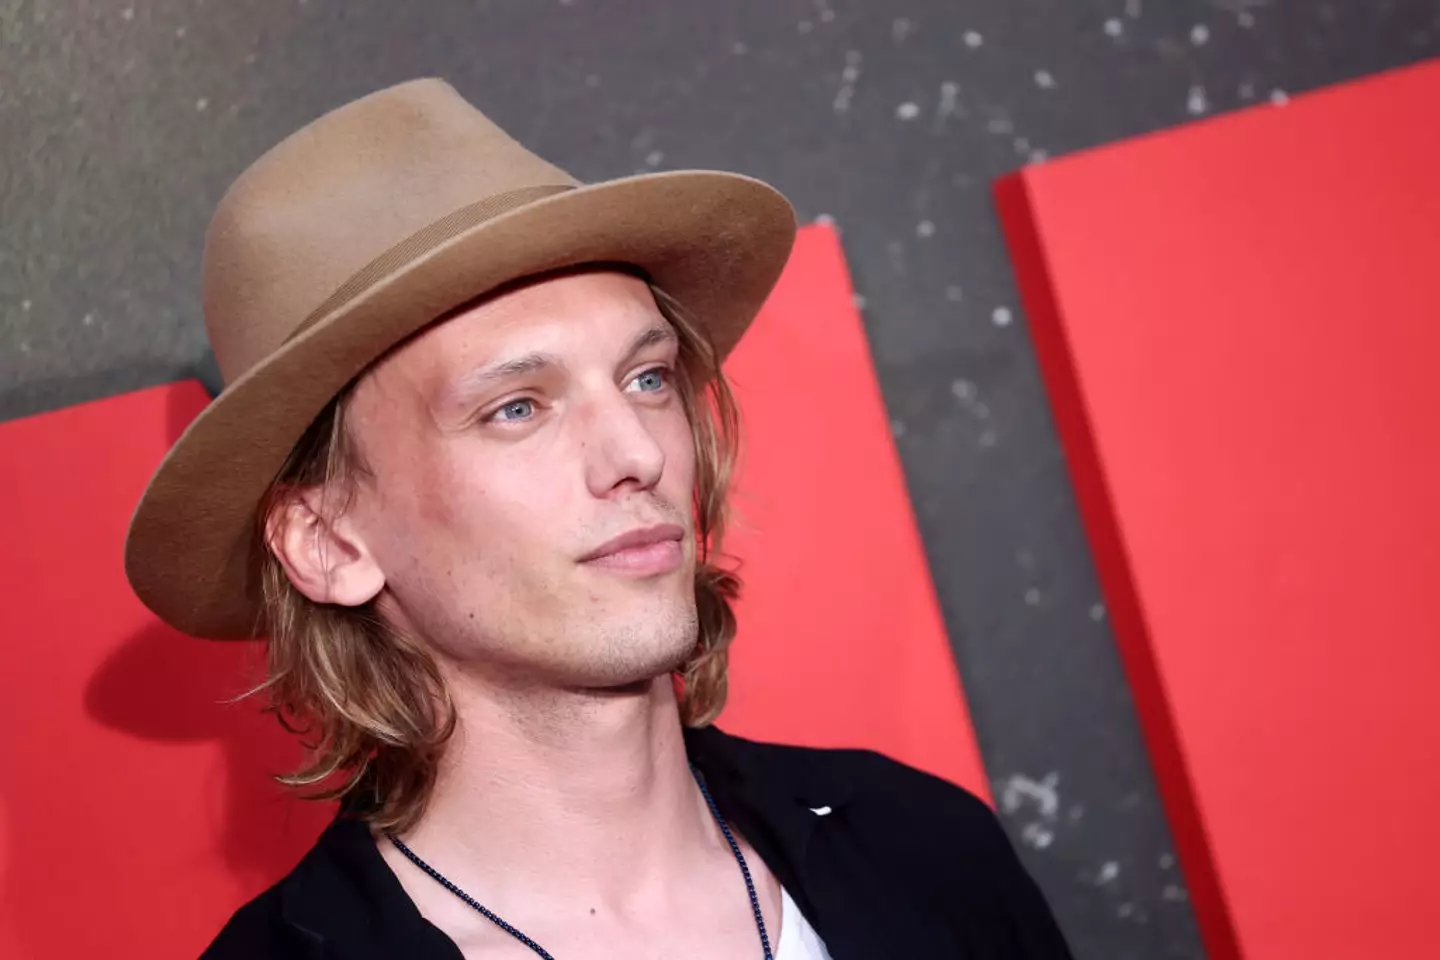 Stranger Things star Jamie Campbell Bower explained he'd gone years without alcohol.